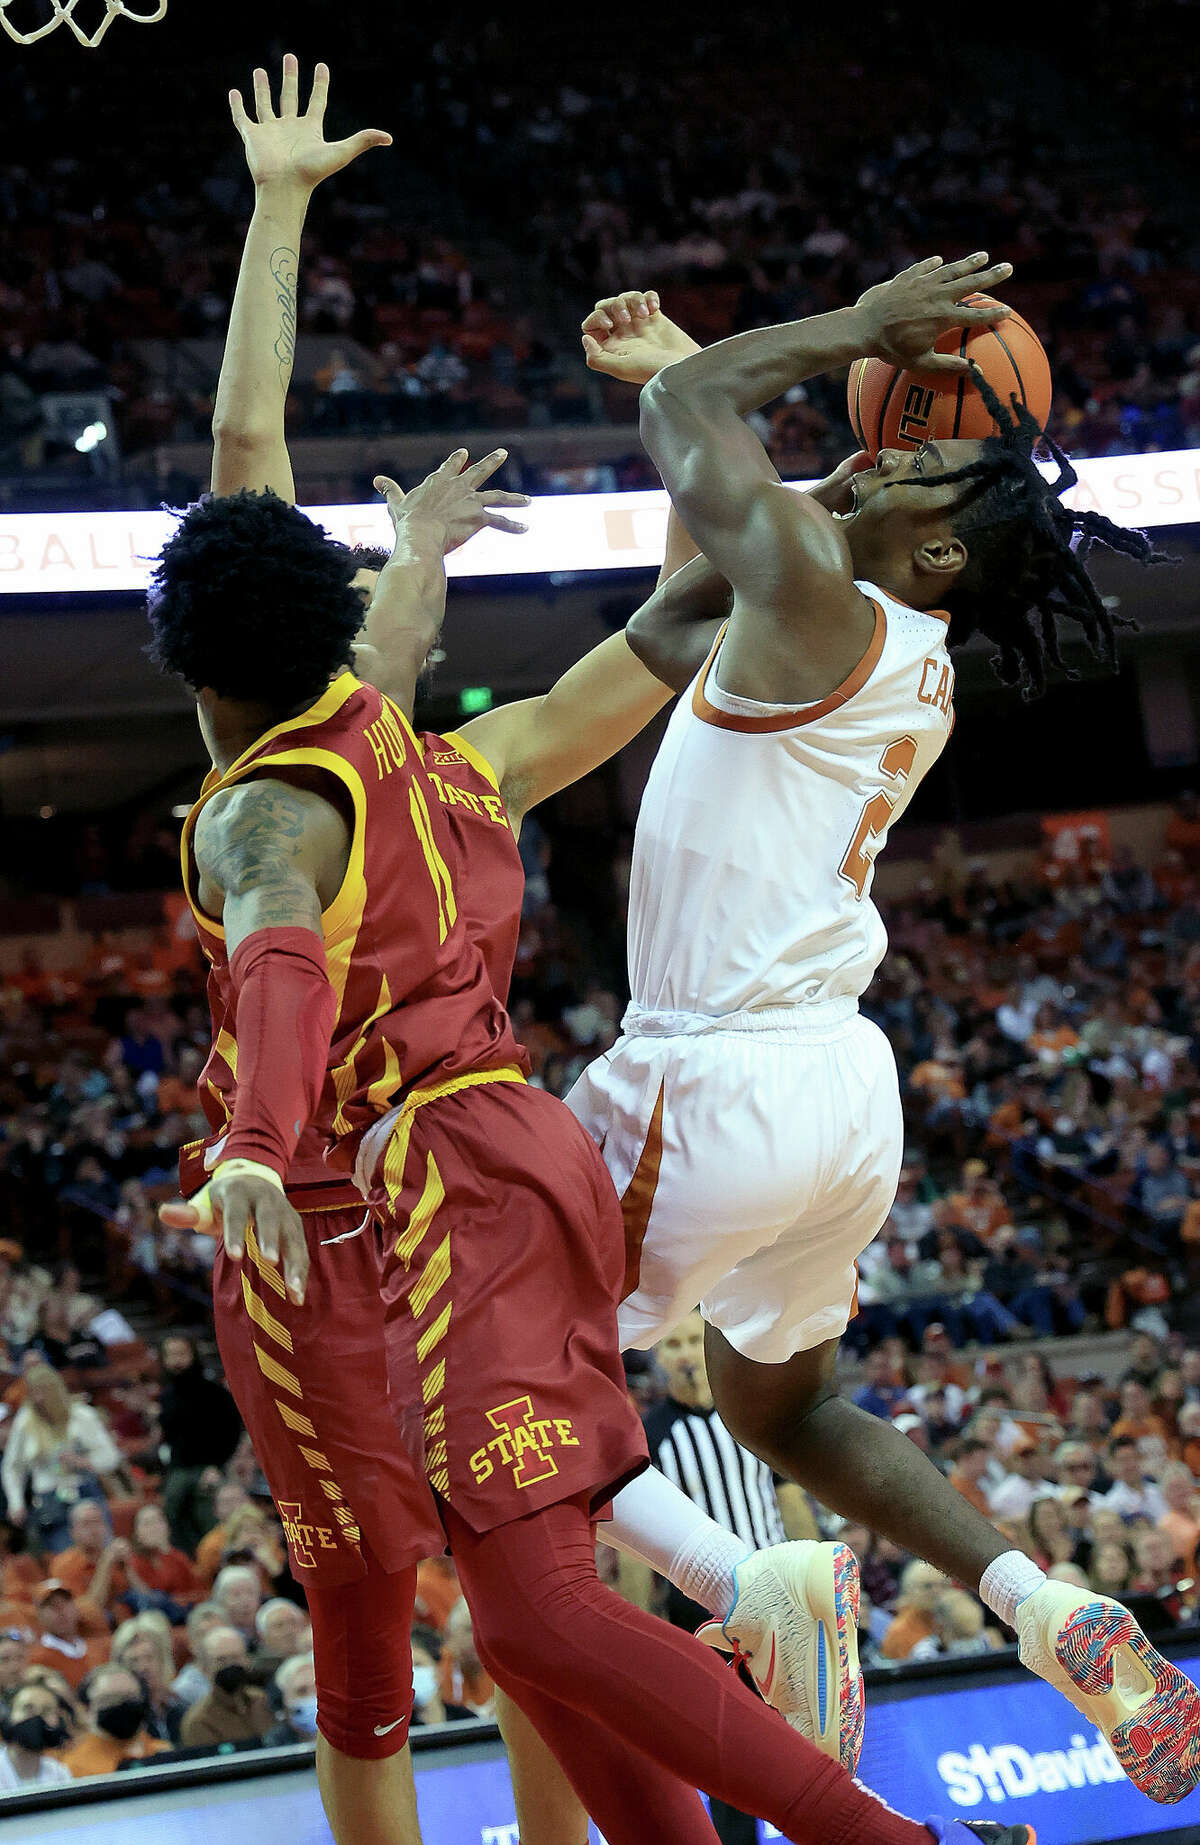 AUSTIN, TEXAS - FEBRUARY 05: Marcus Carr #2 of the Texas Longhorns leaps to the basket against the Iowa State Cyclones at the Frank Erwin Center on February 05, 2022 in Austin, Texas. (Photo by Chris Covatta/Getty Images)